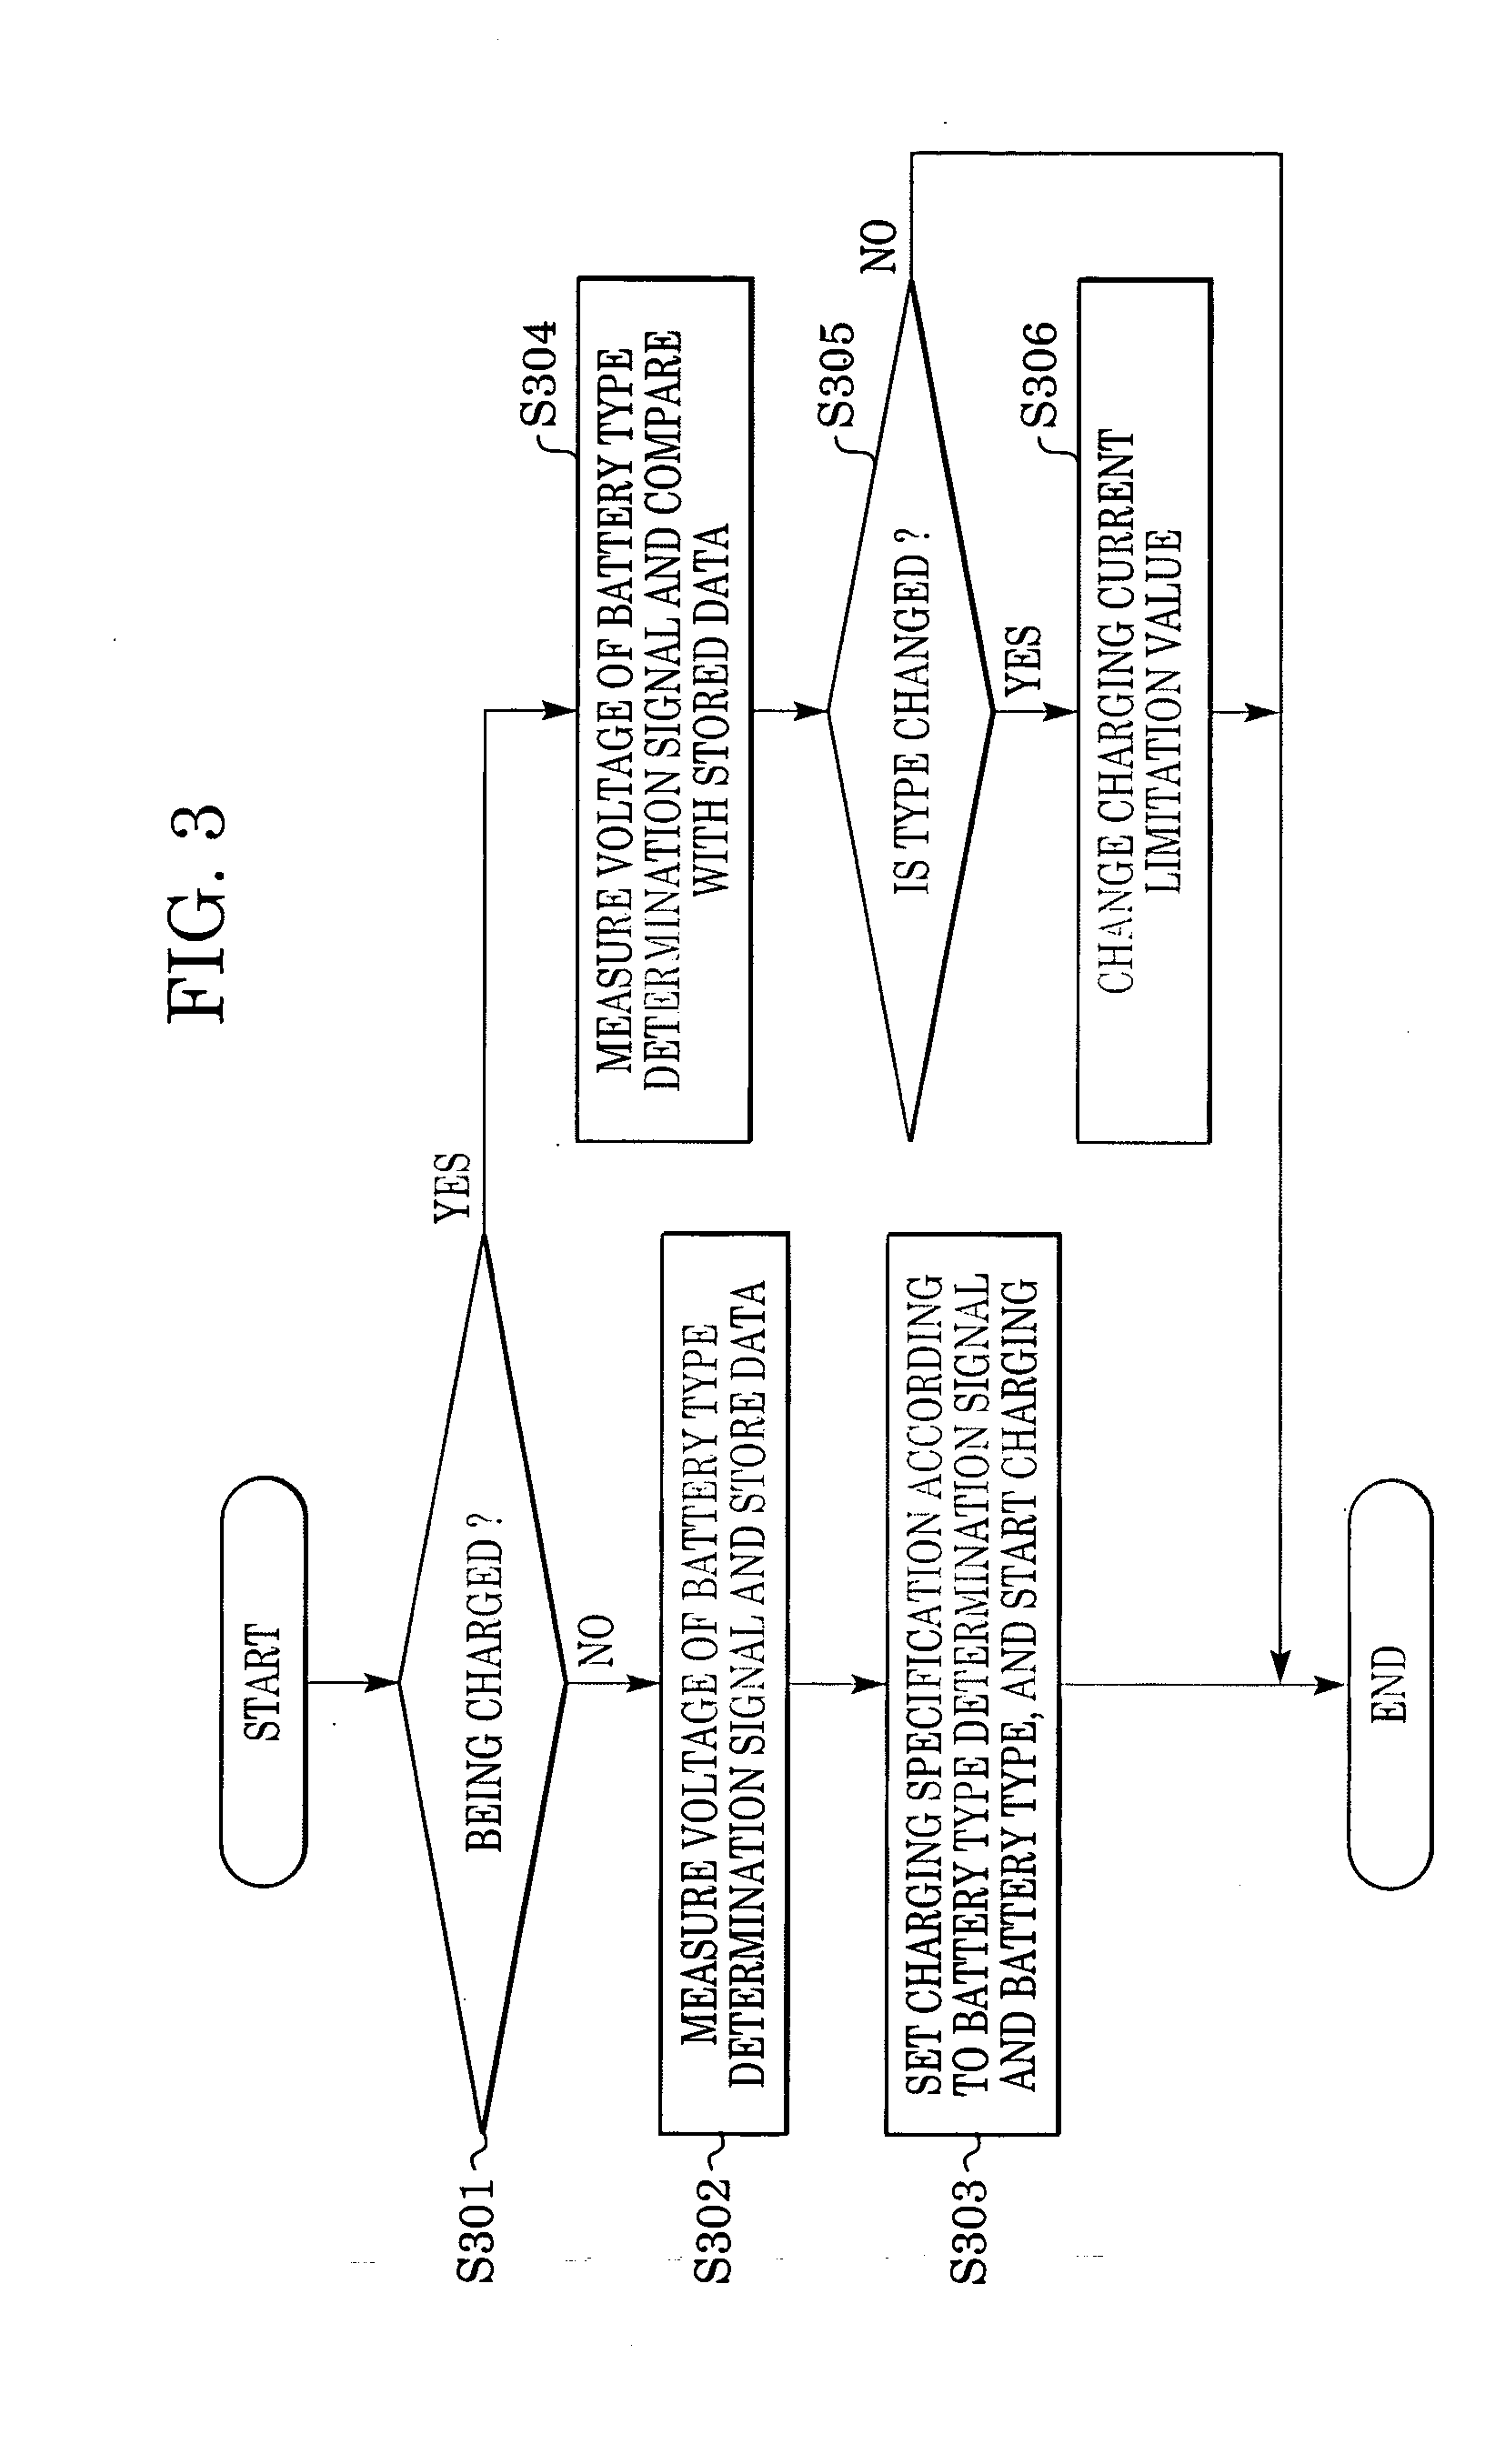 Secondary battery charging method and apparatus